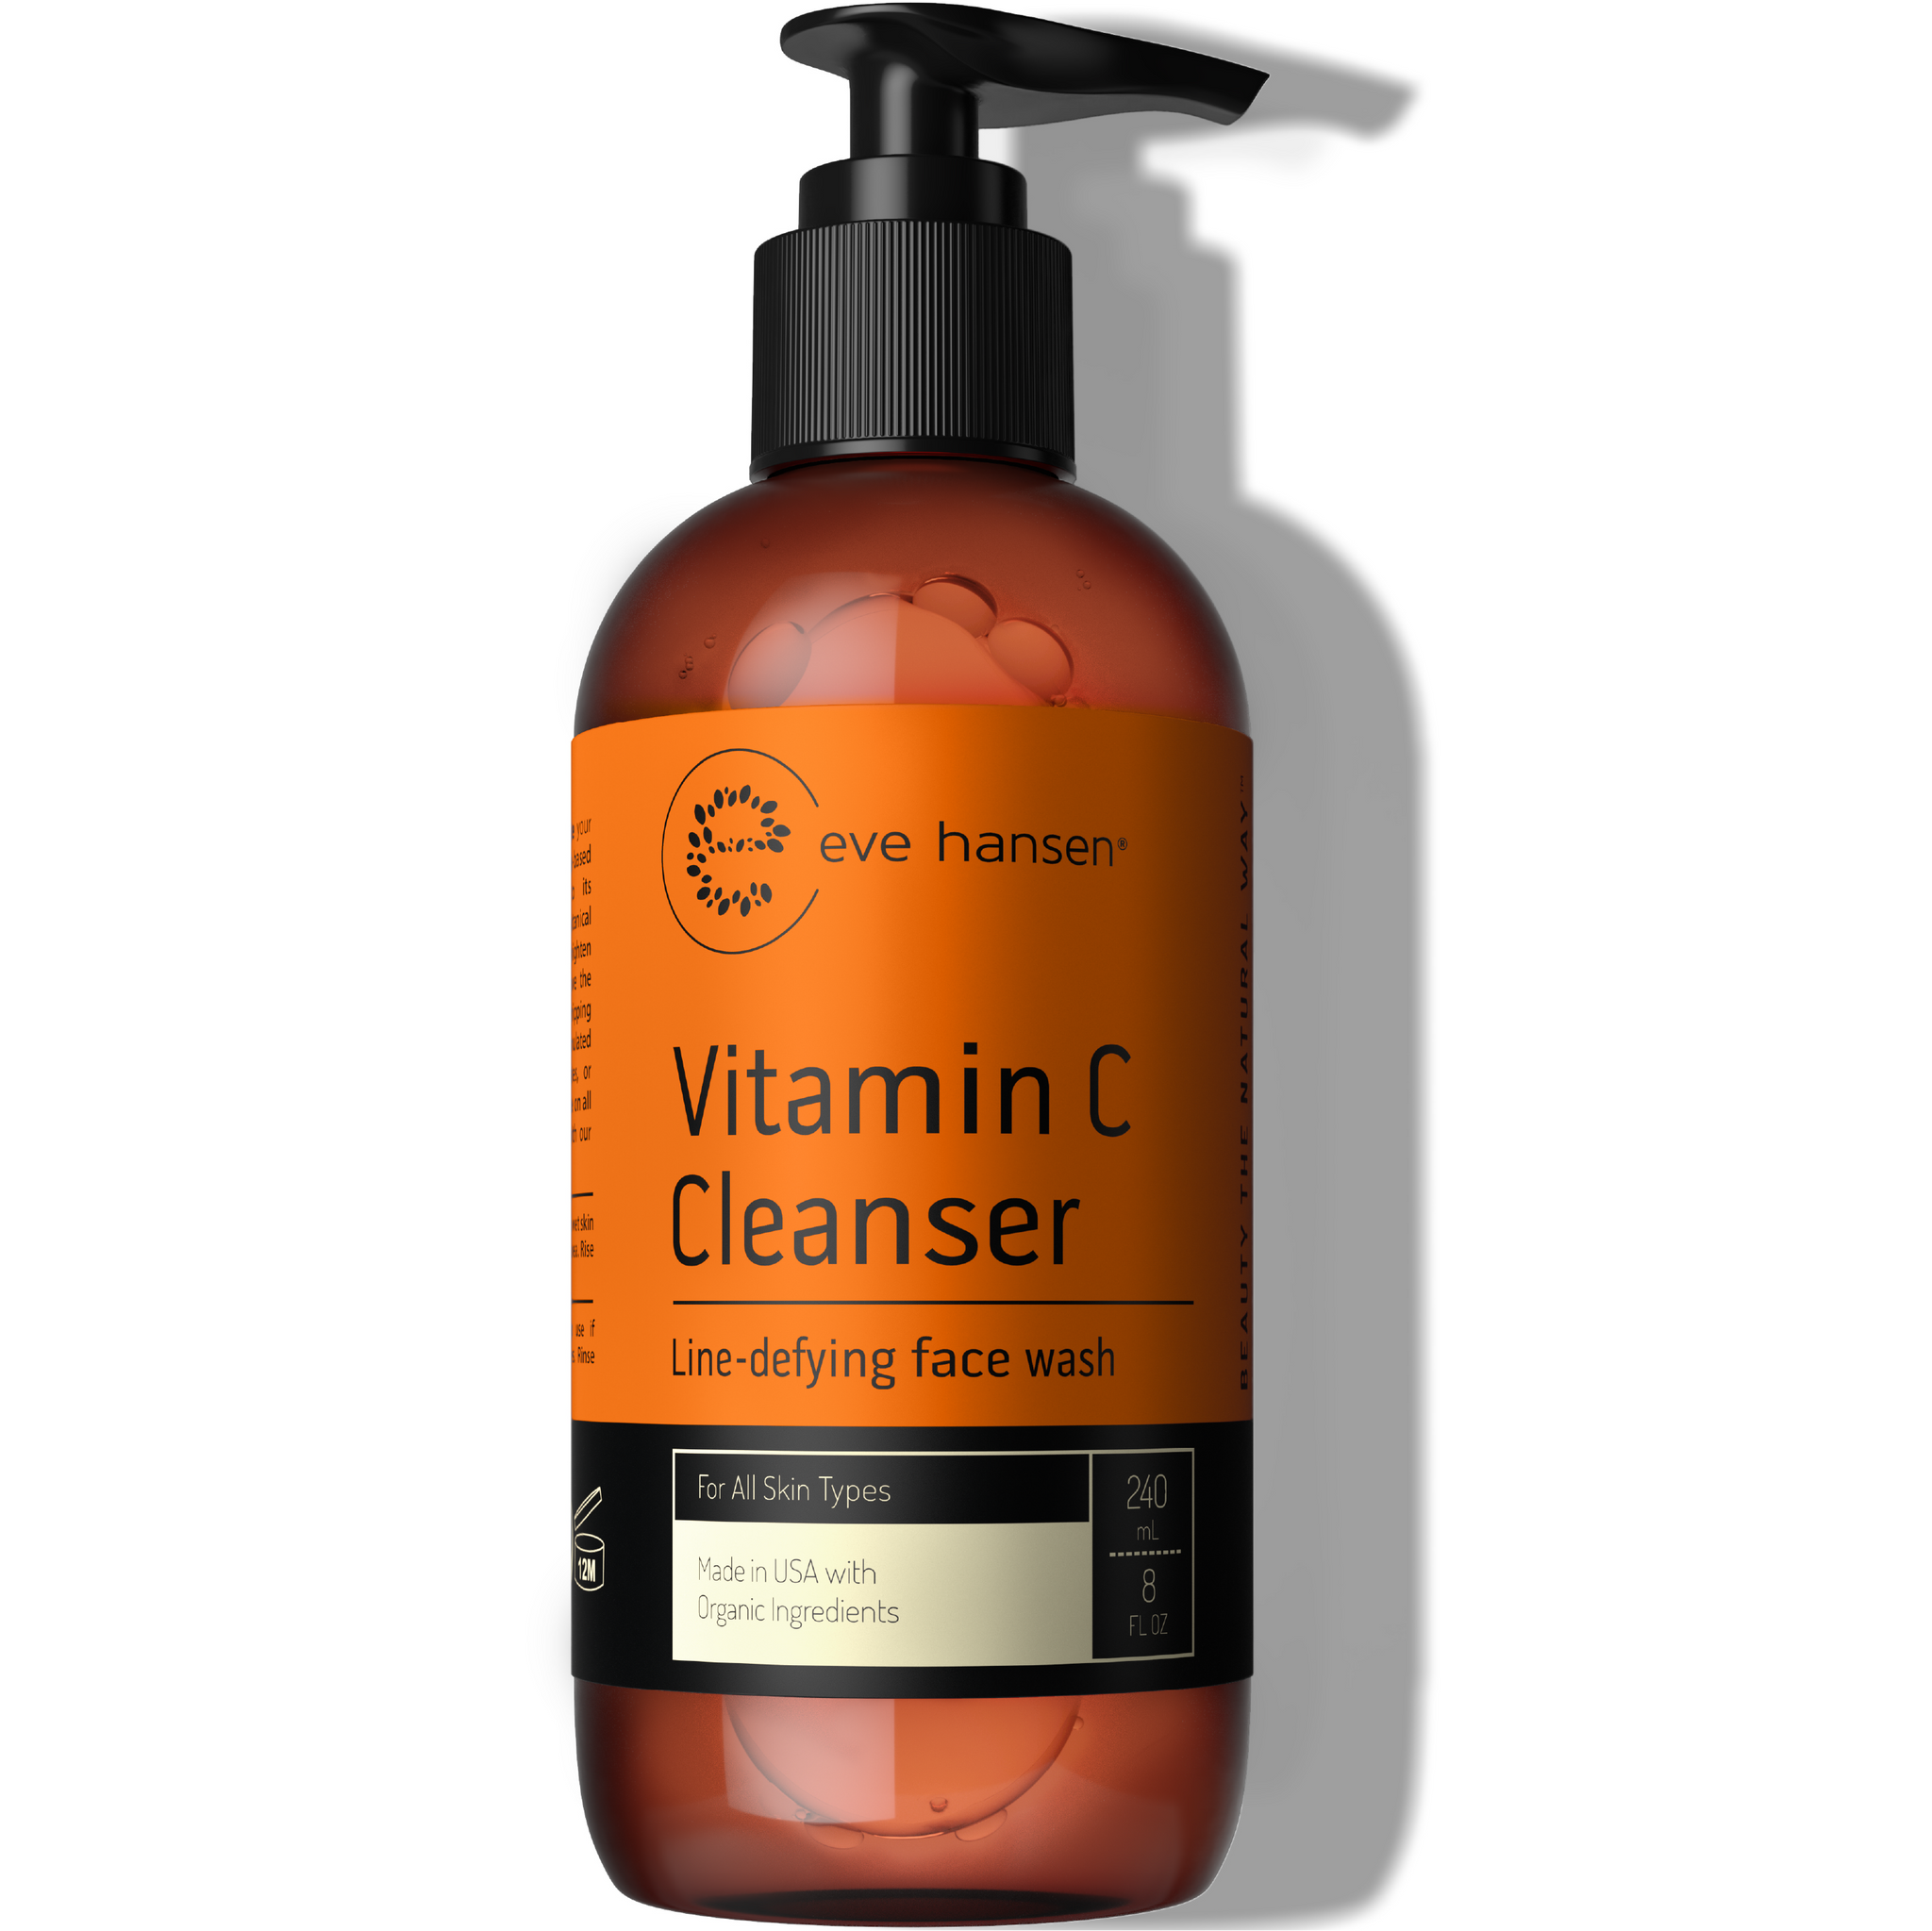 Vitamin C Cleanser Face Wash | HUGE 8 oz Anti Aging Facial Cleanser for Dark Circles, Age Spots and Fine Lines | Natural Gel Face Cleanser with Aloe Vera, Vitamin E & Rosehip